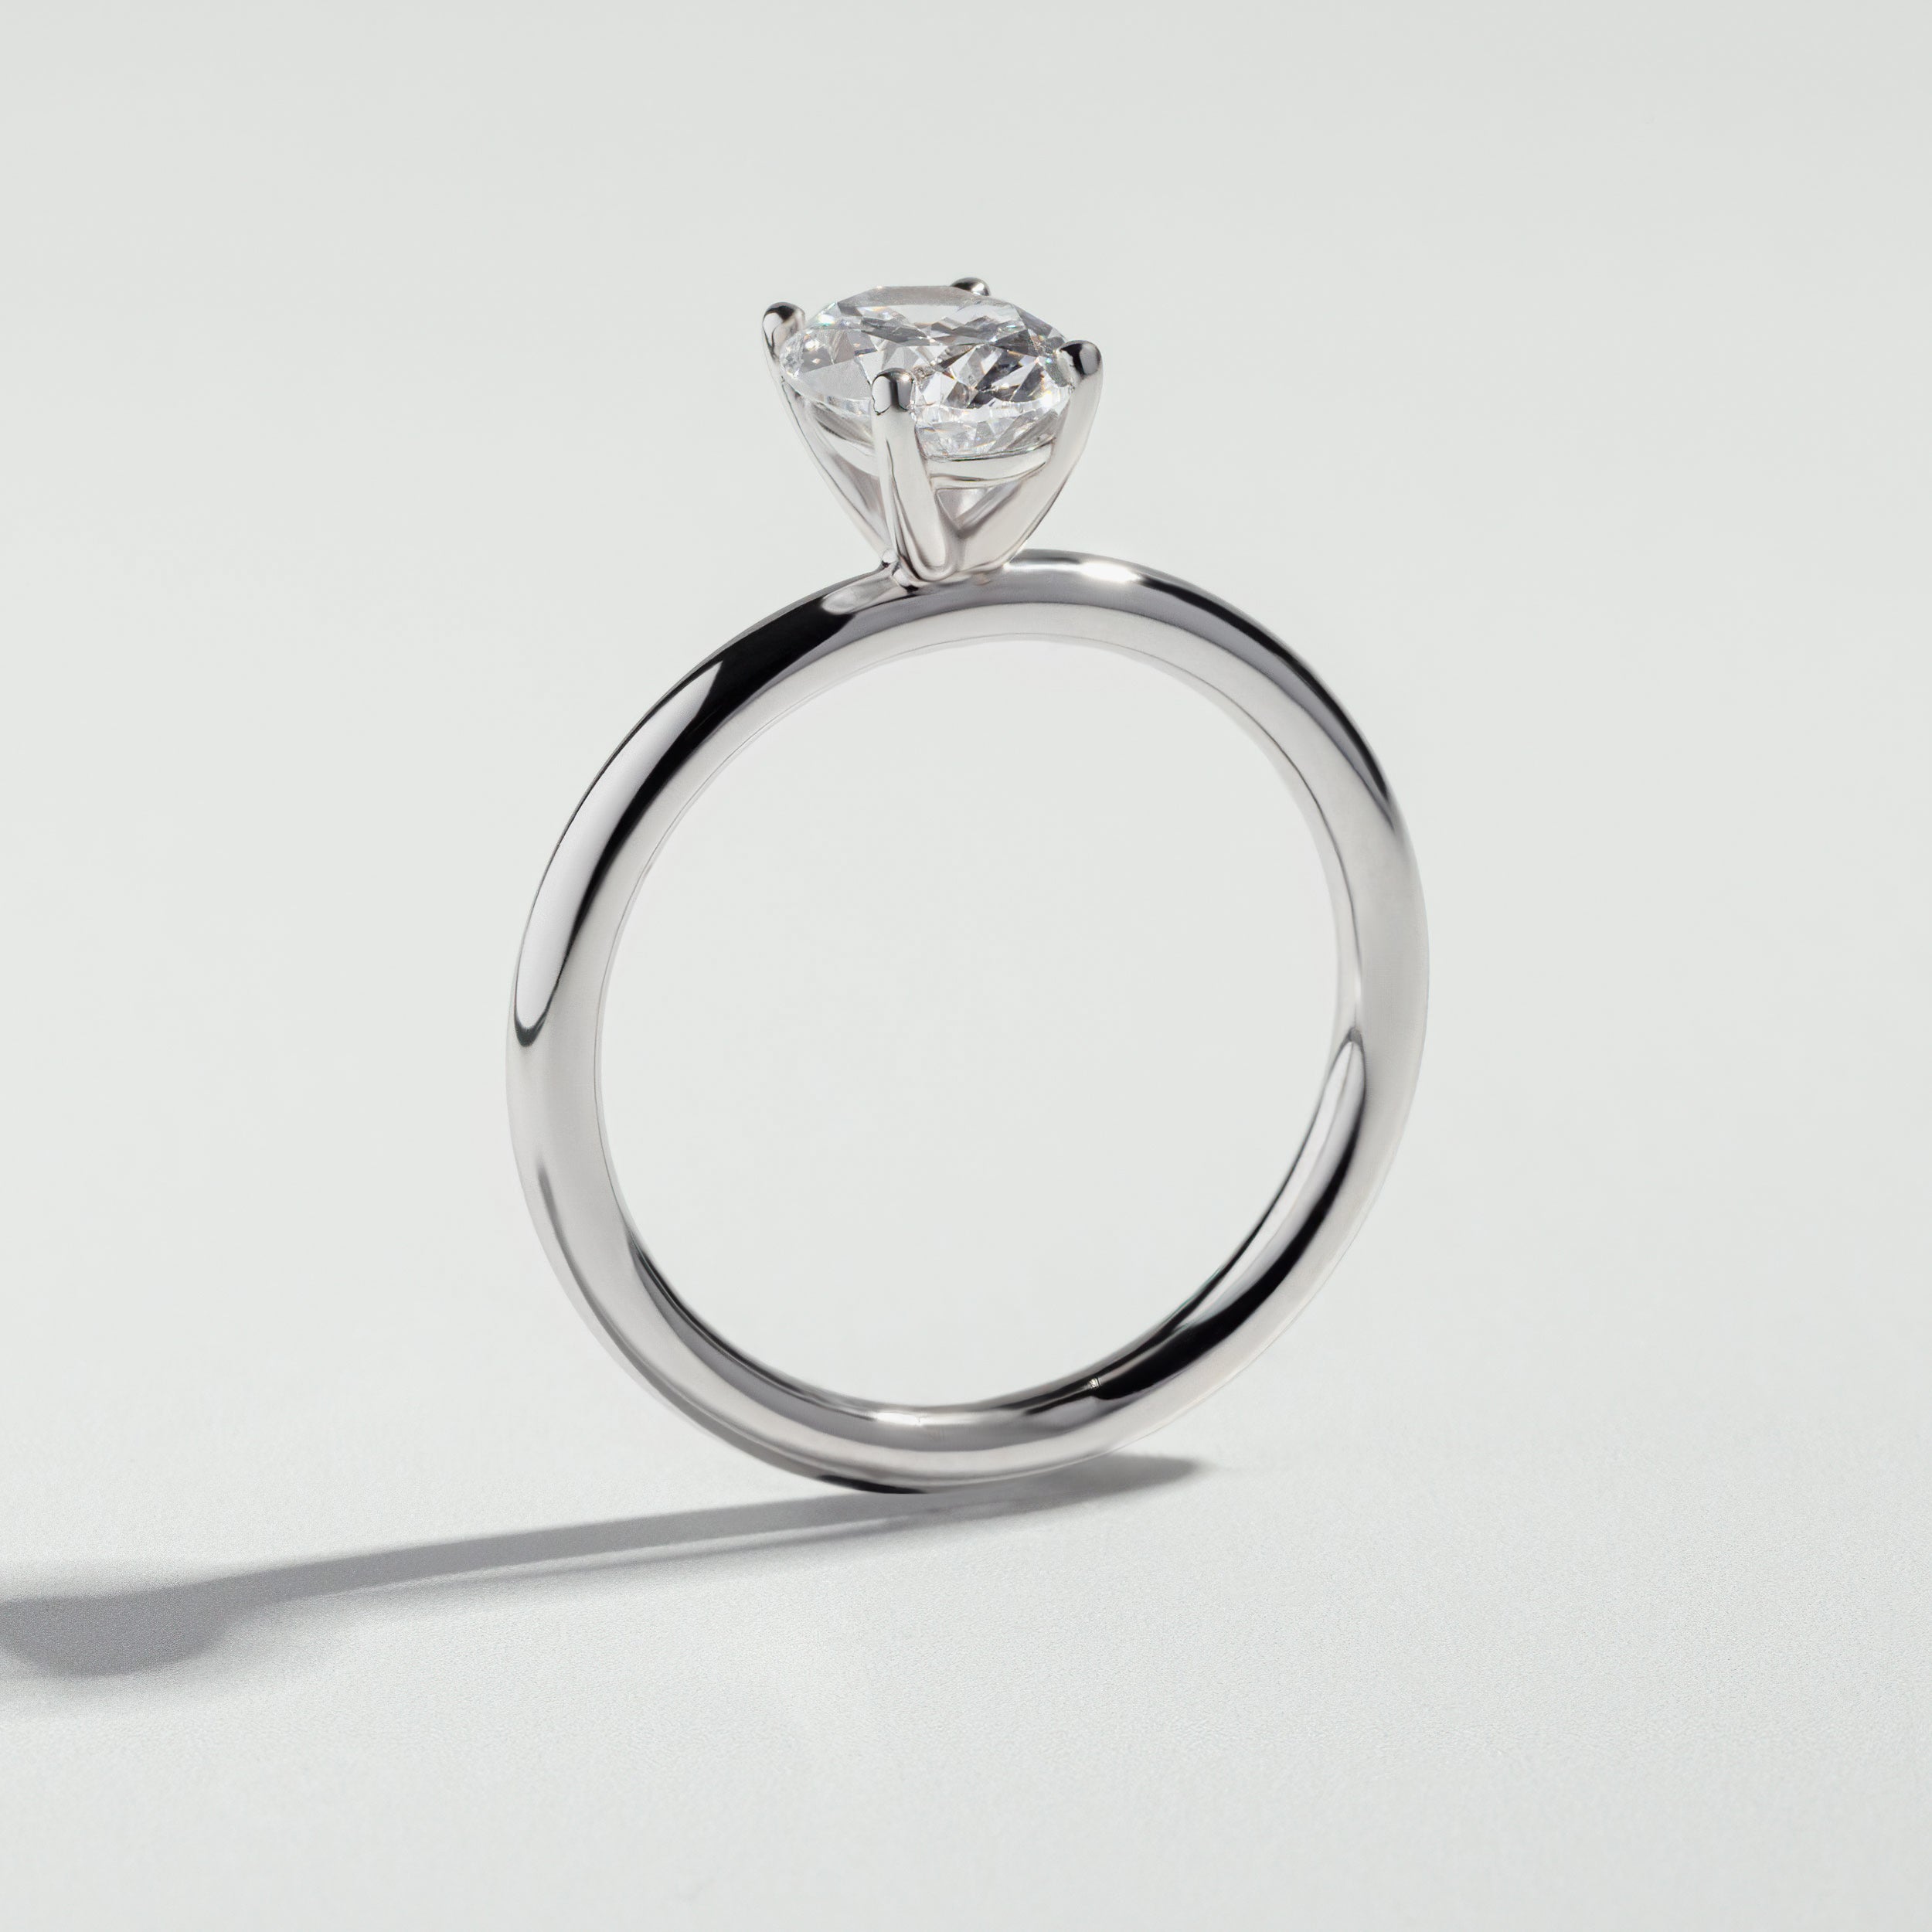 The Oval Cut Knife Edge Diamond Solitaire Ring